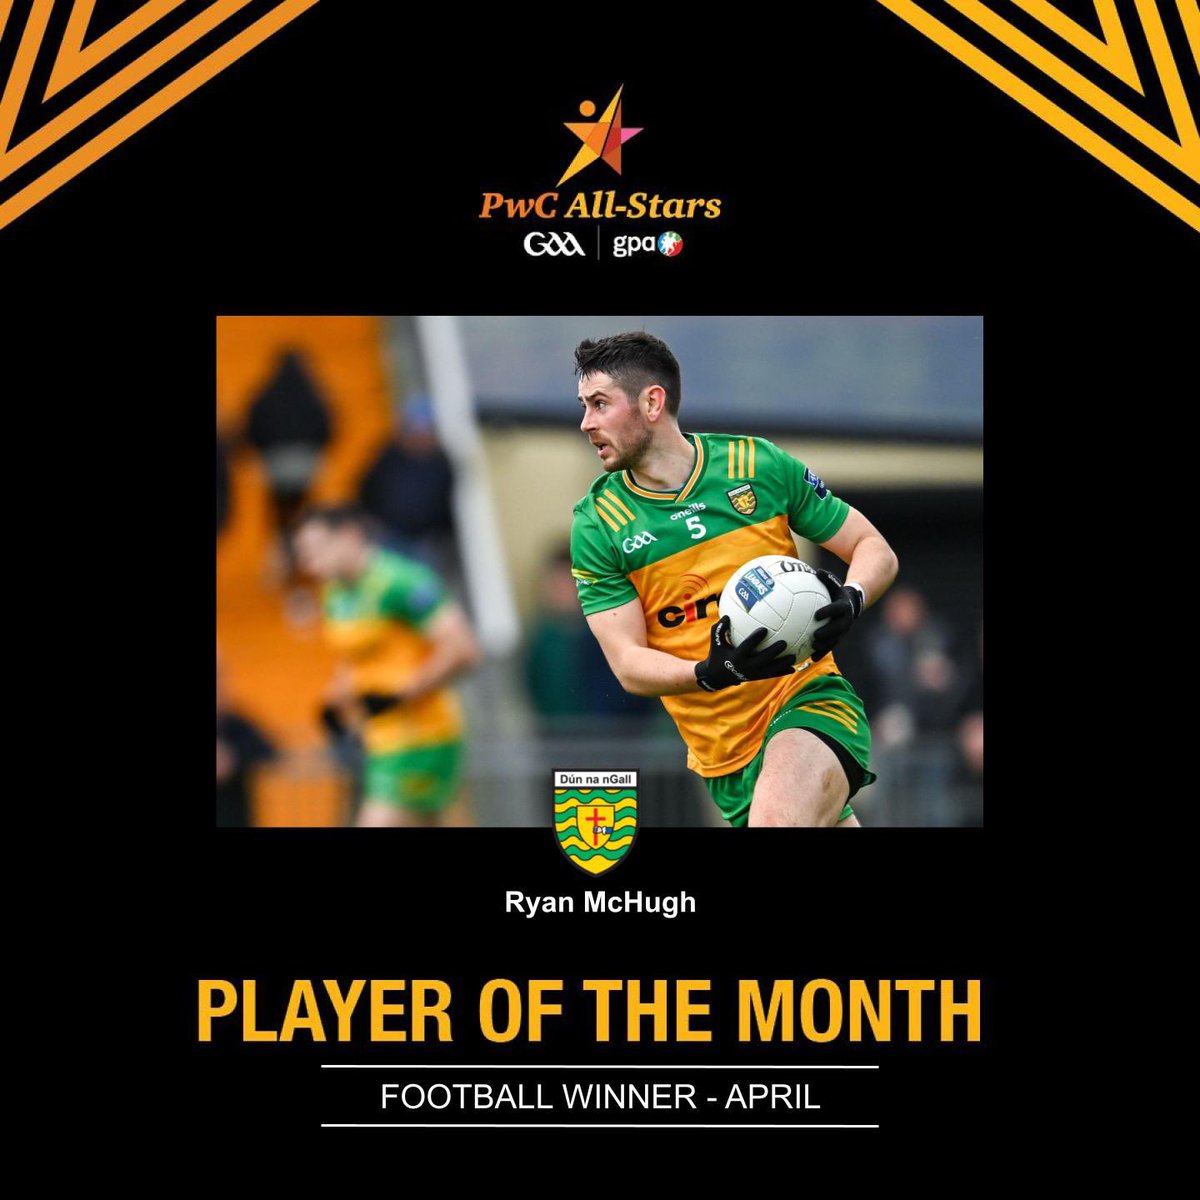 👏 The winner of April’s PwC @officialgaa / @gaelicplayers Football Player of the Month is: 🏆 Ryan McHugh - @officialdonegal 🏆 #PwCAllStars